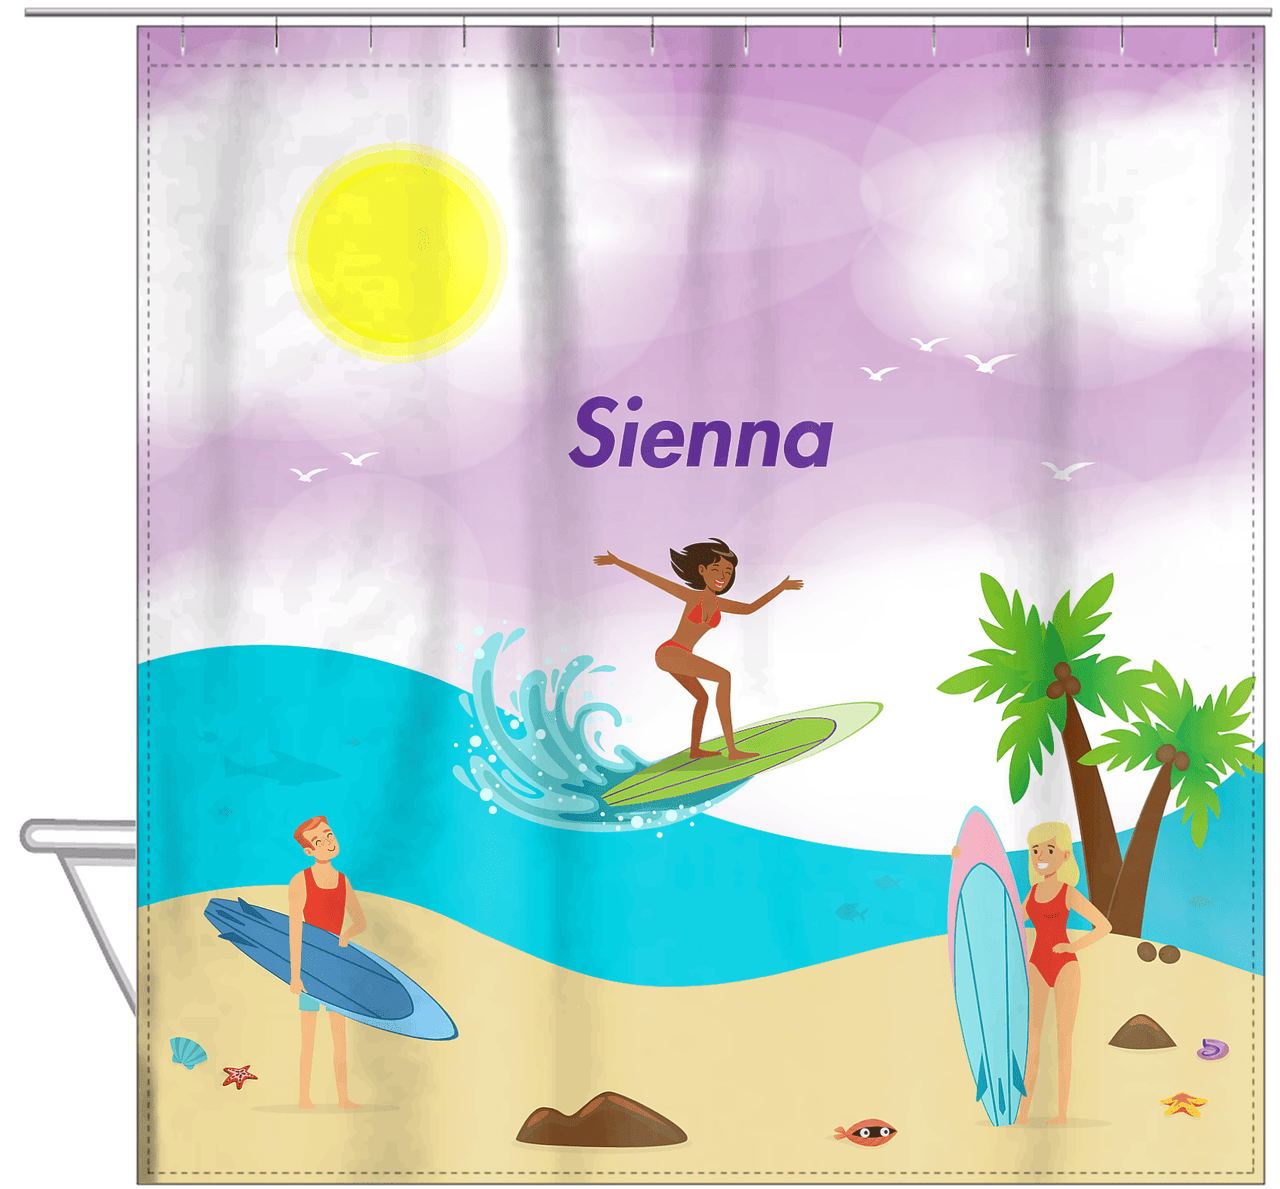 Personalized Surfing Shower Curtain IV - Black Girl II - Hanging View